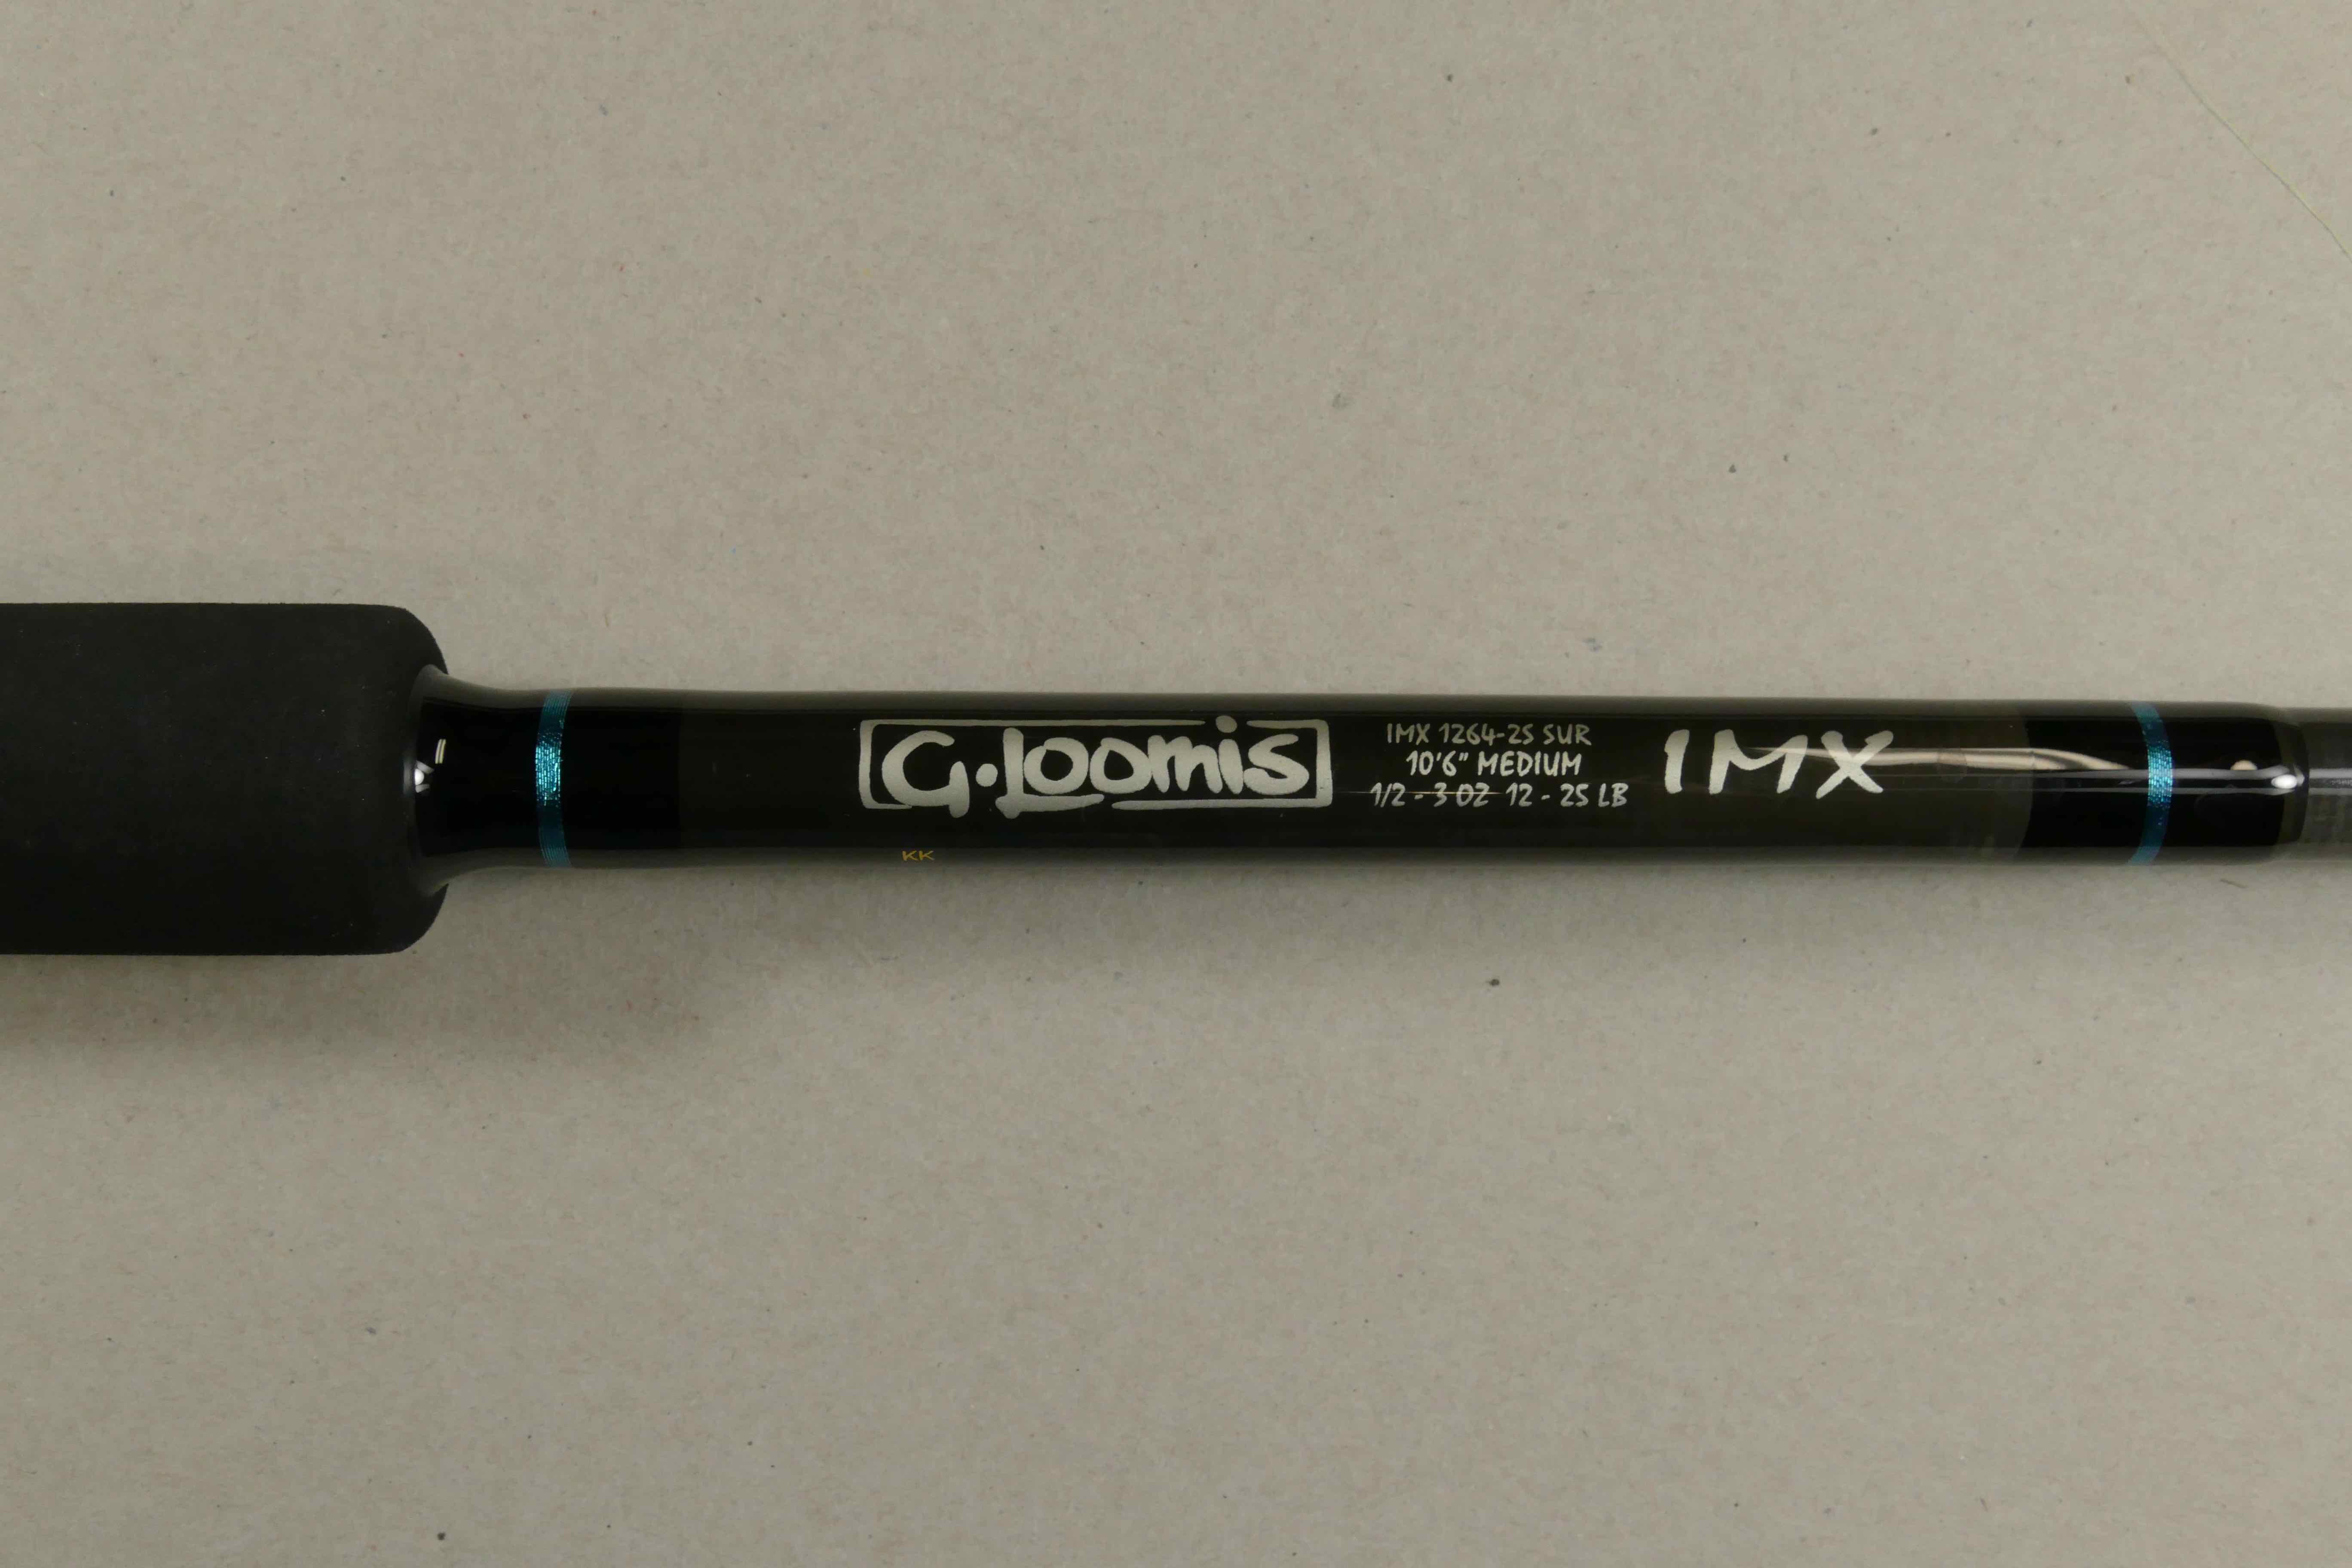 G. Loomis IMX 10’ 6” medium power surf, 2 piece spinning rod suitable for 1/2 to 3 oz. lures. IMX 1264-2S SUR 11767-01    $350.00